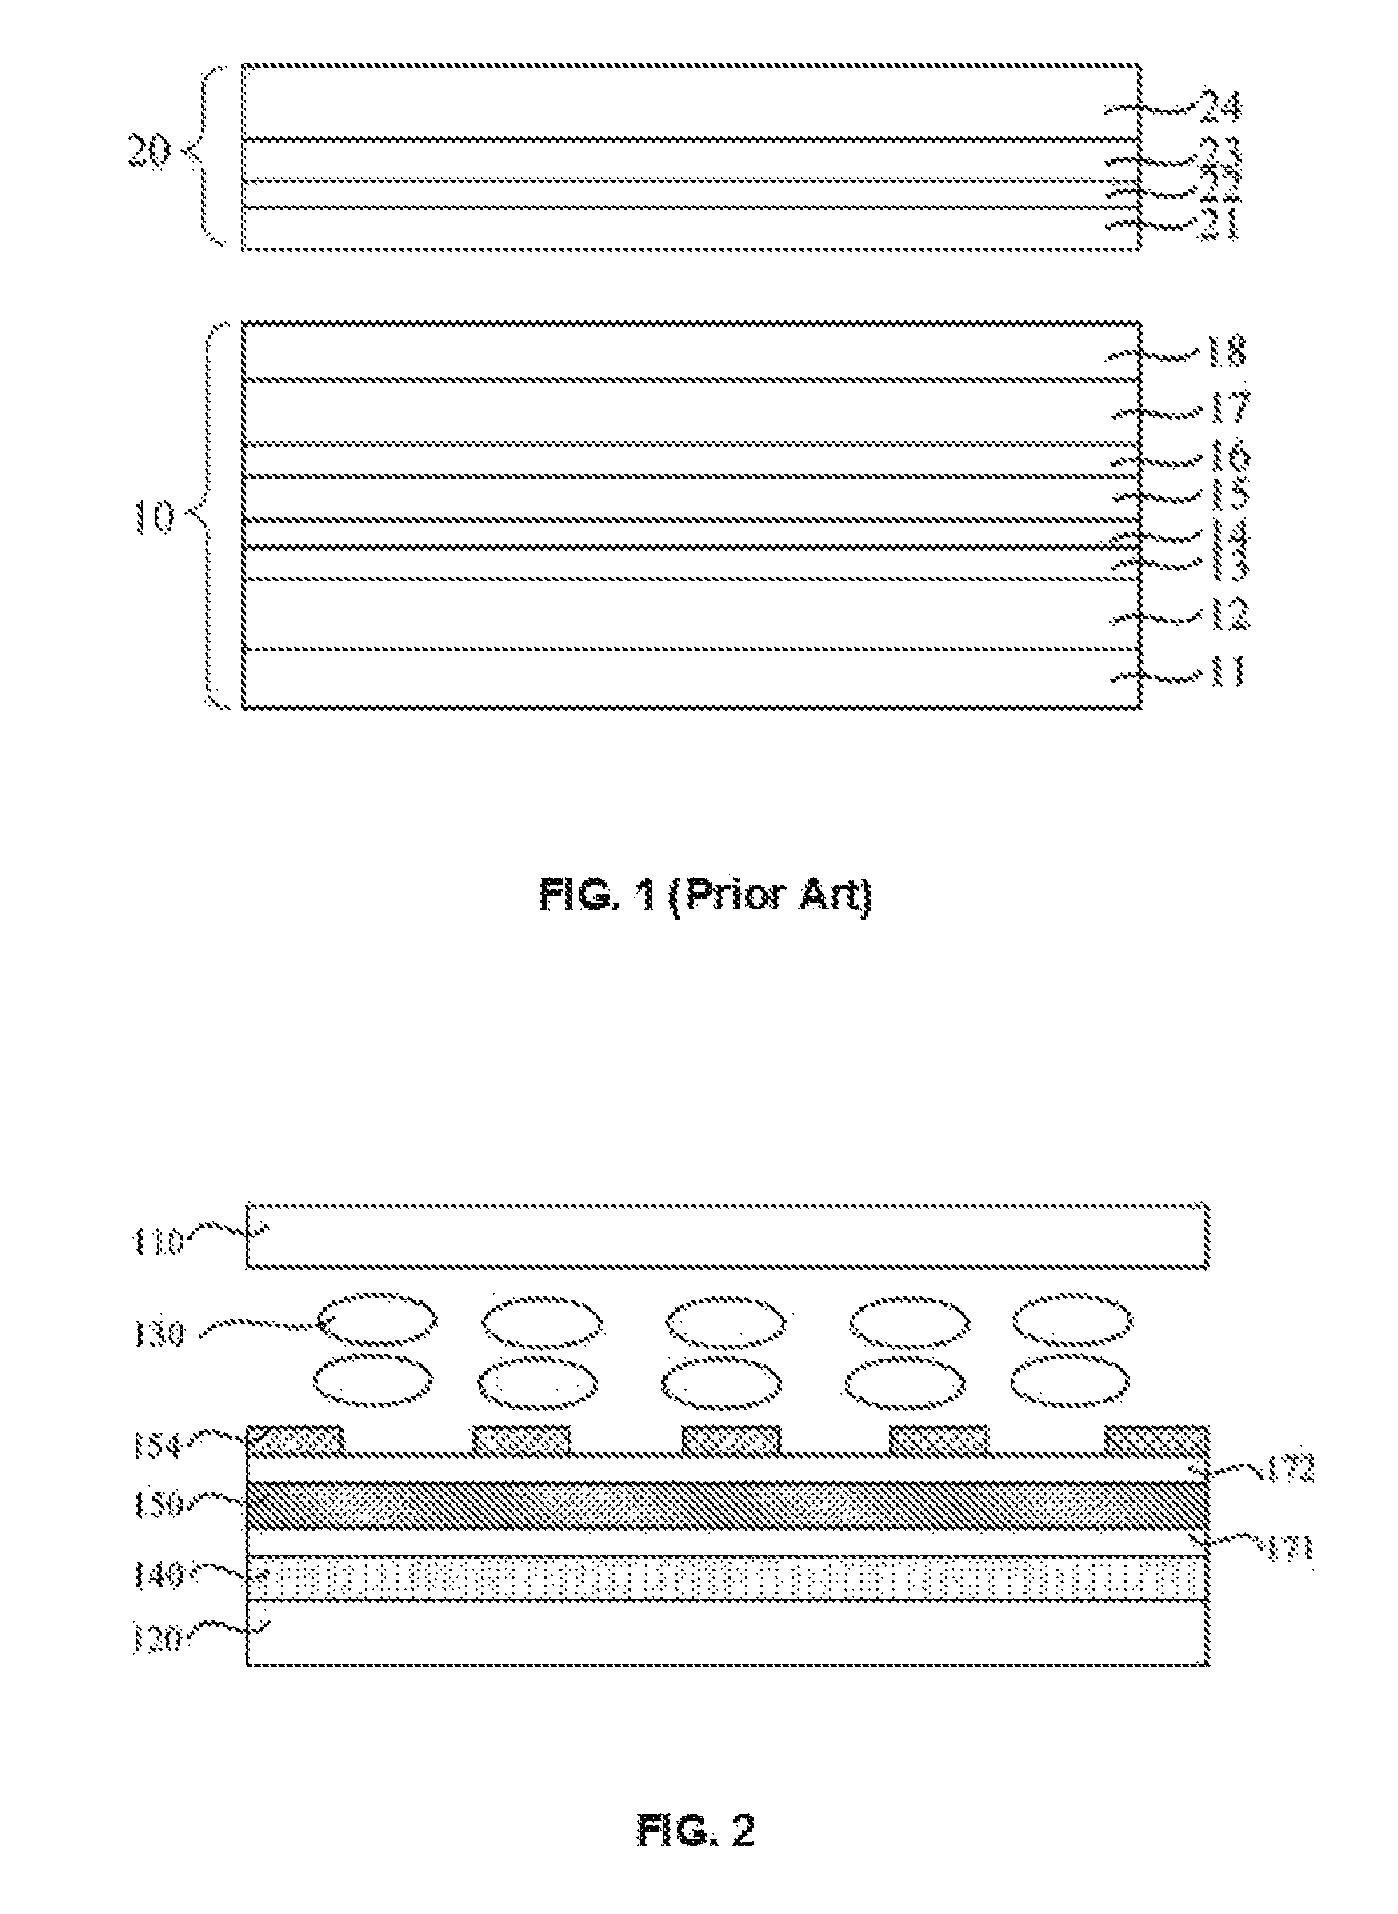 Embedded touch screen liquid crystal display device and touch drive method thereof